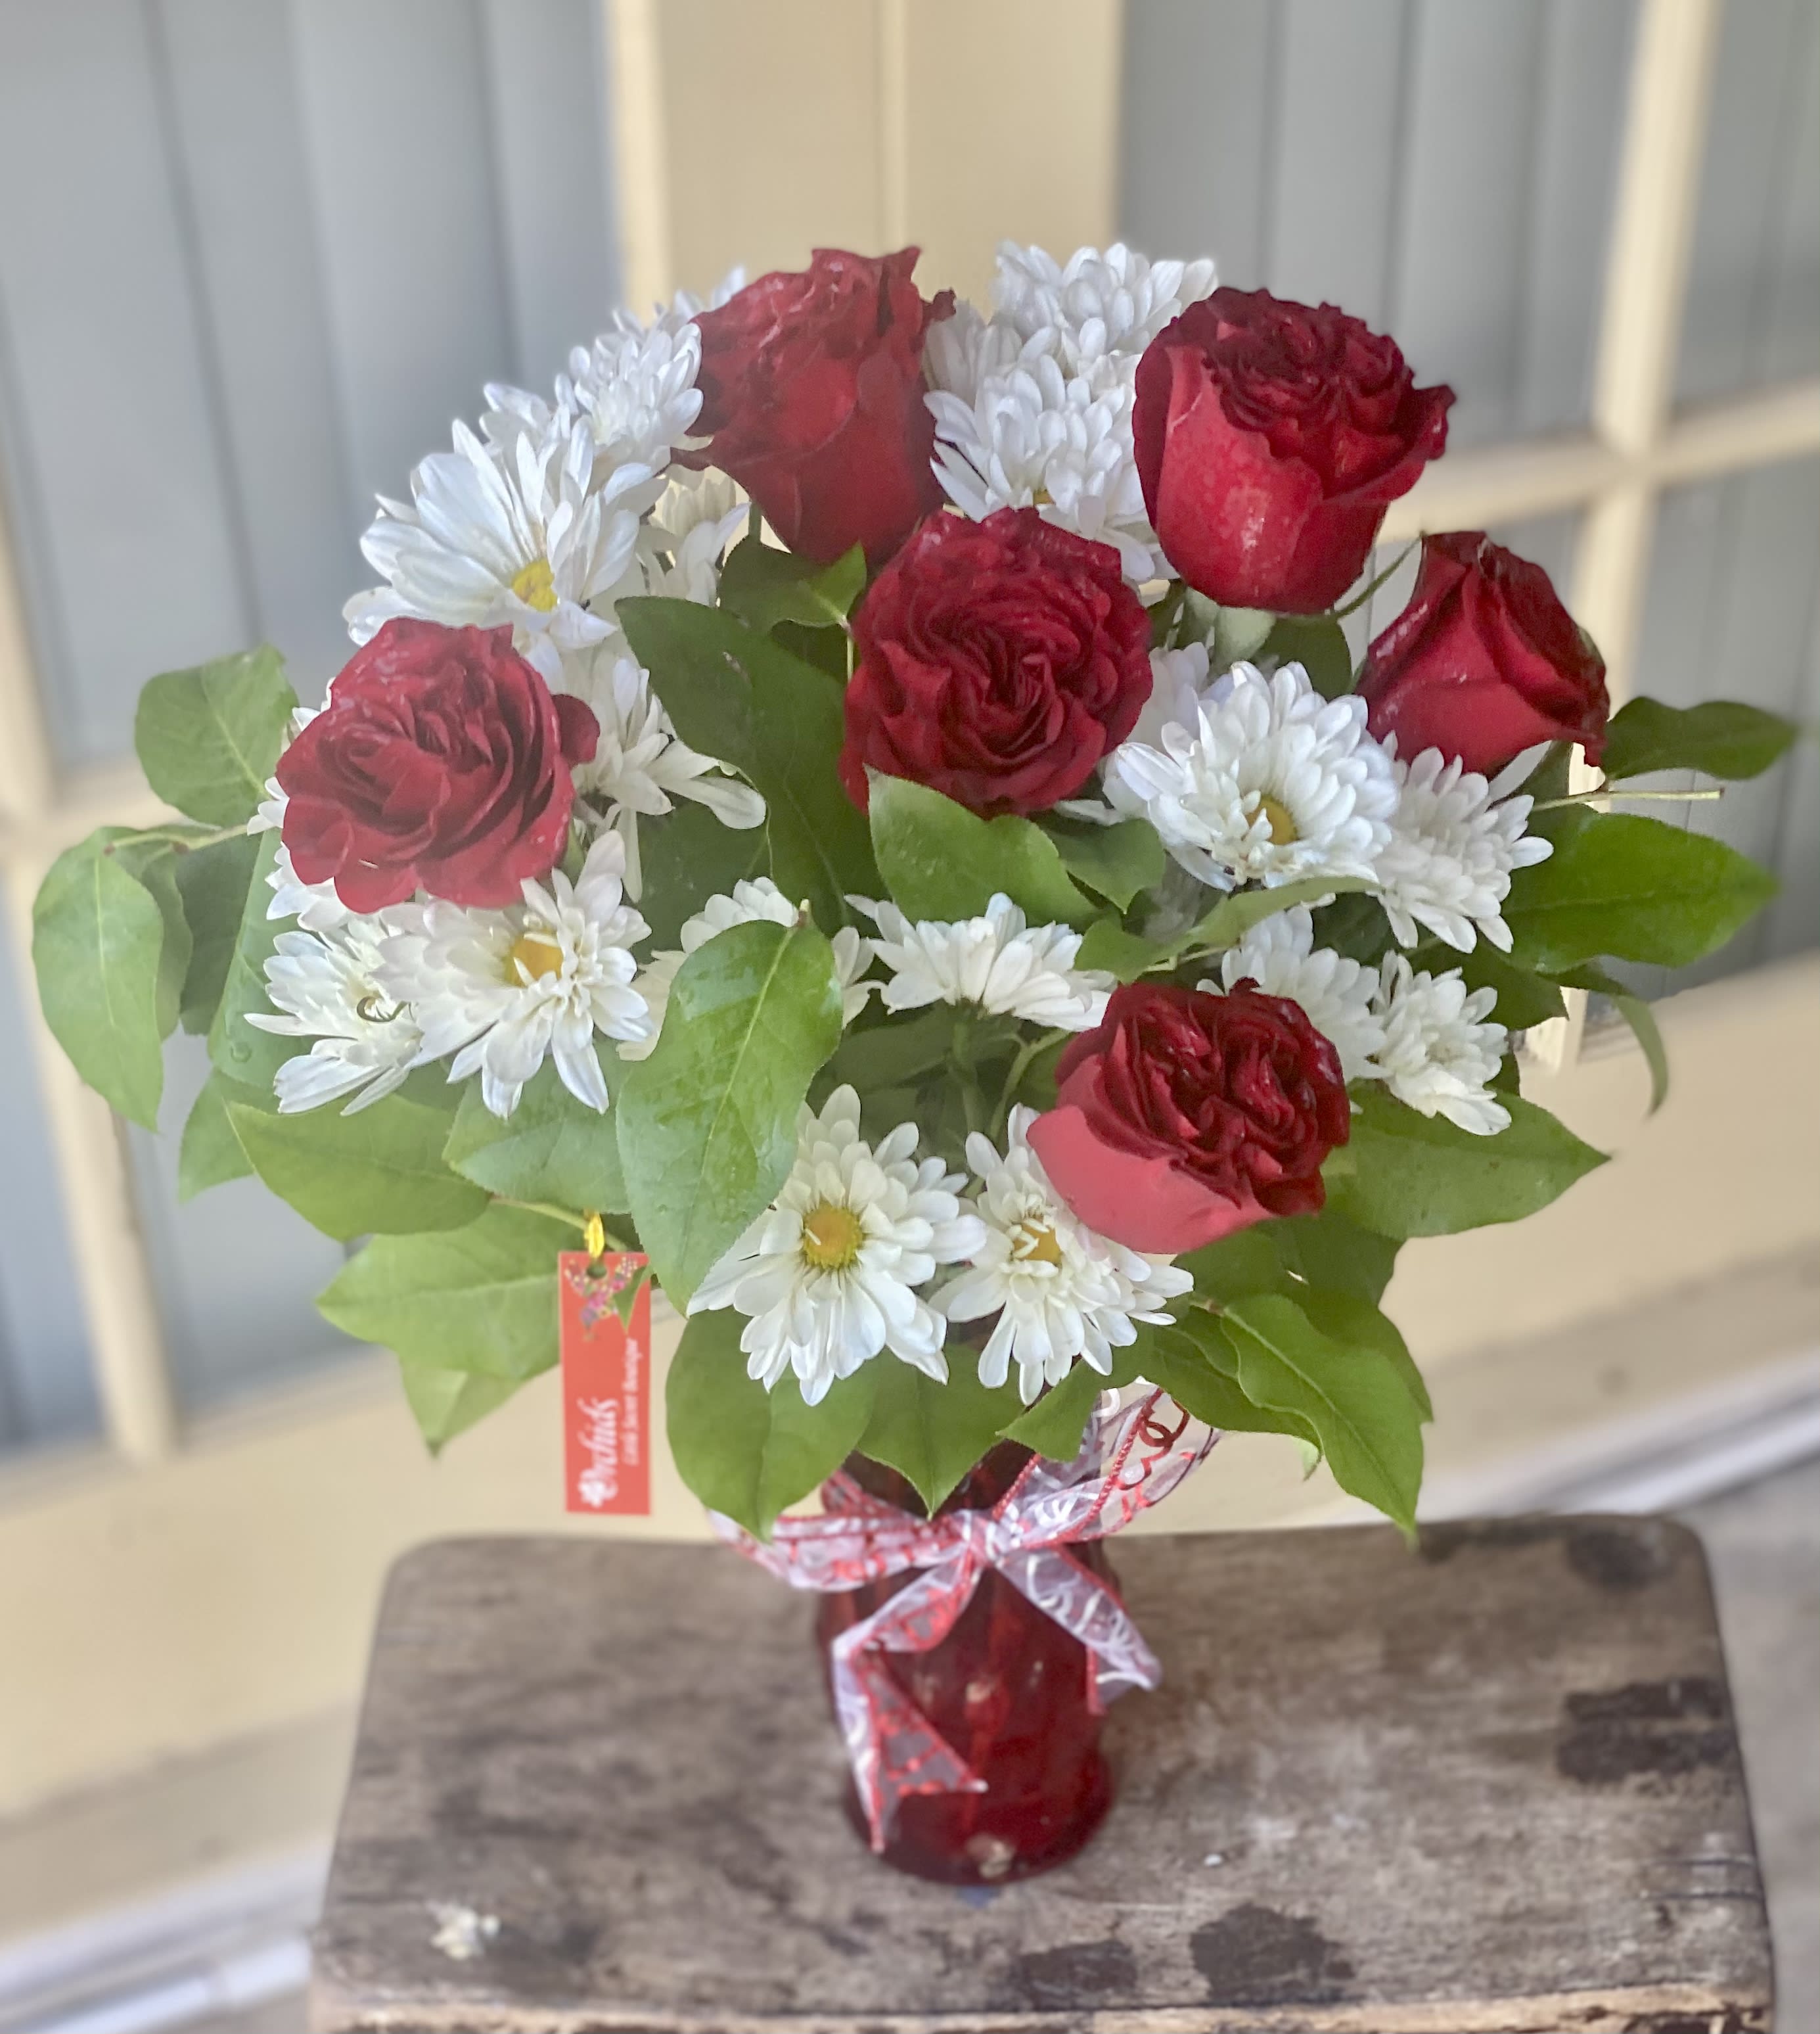 Heart Shaped Funeral Wreath  Red Carnations White Daisies